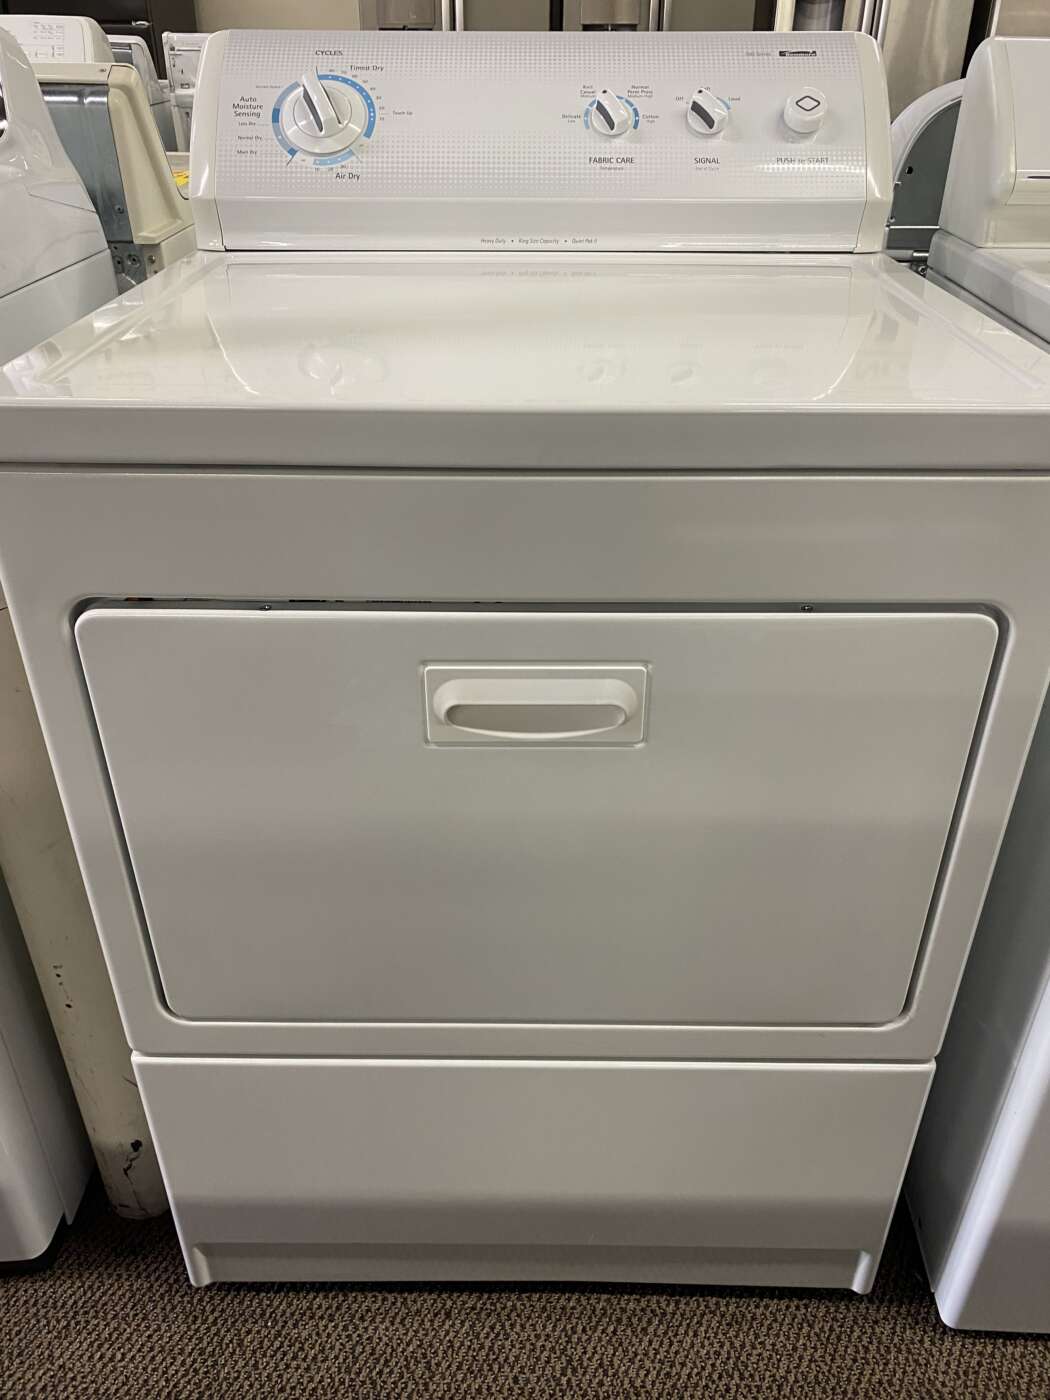 Reconditioned KENMORE 7.0 Cu. Ft. Electric Dryer – White